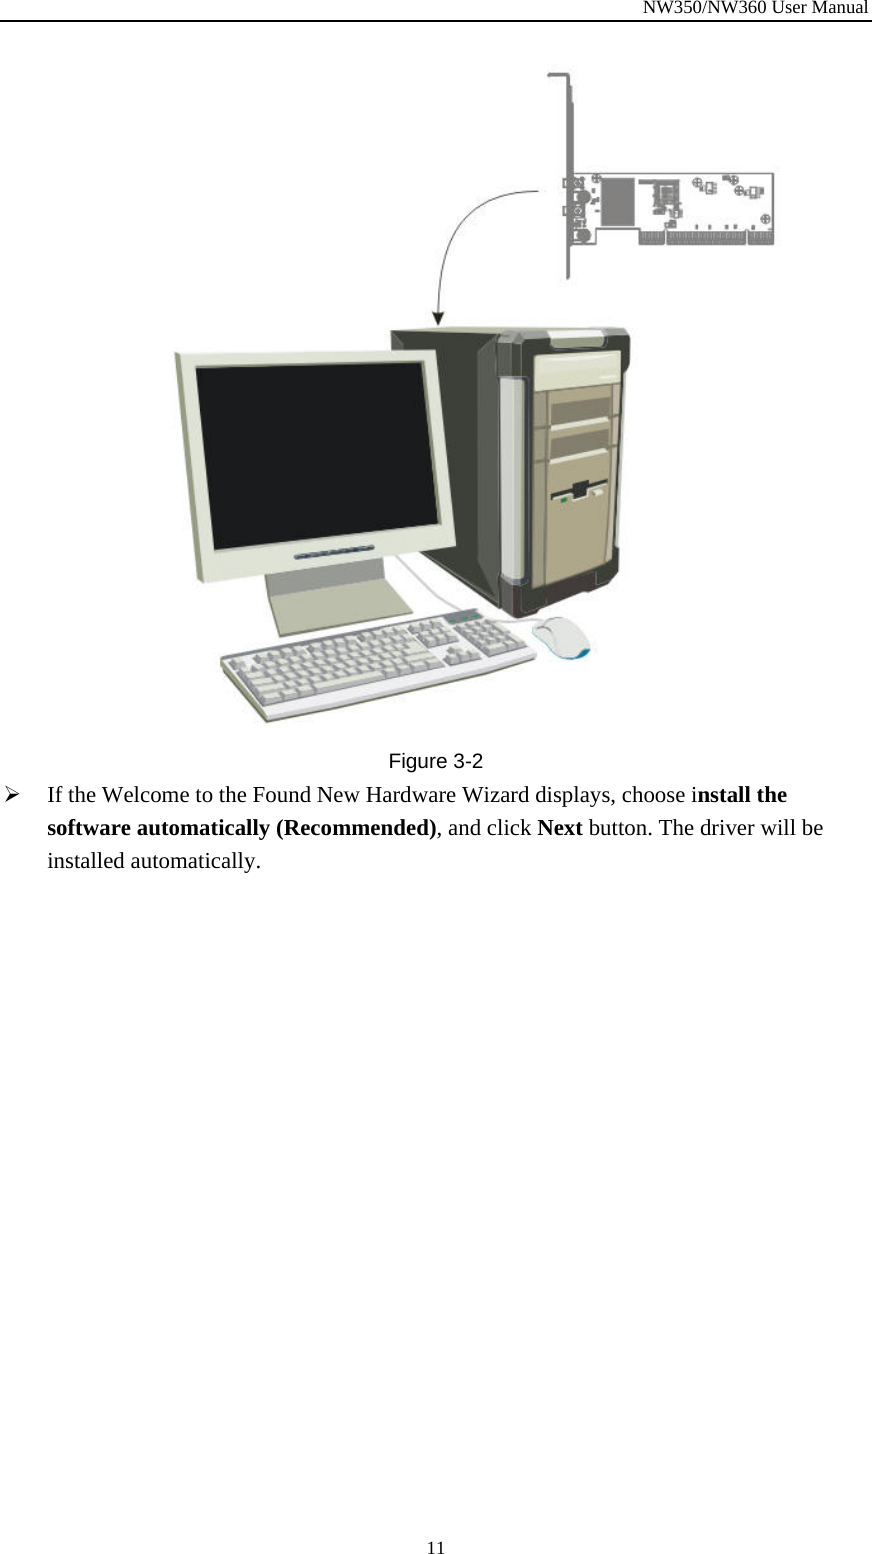 NW350/NW360 User Manual  11 Figure  3-2 ¾ If the Welcome to the Found New Hardware Wizard displays, choose install the software automatically (Recommended), and click Next button. The driver will be installed automatically. 